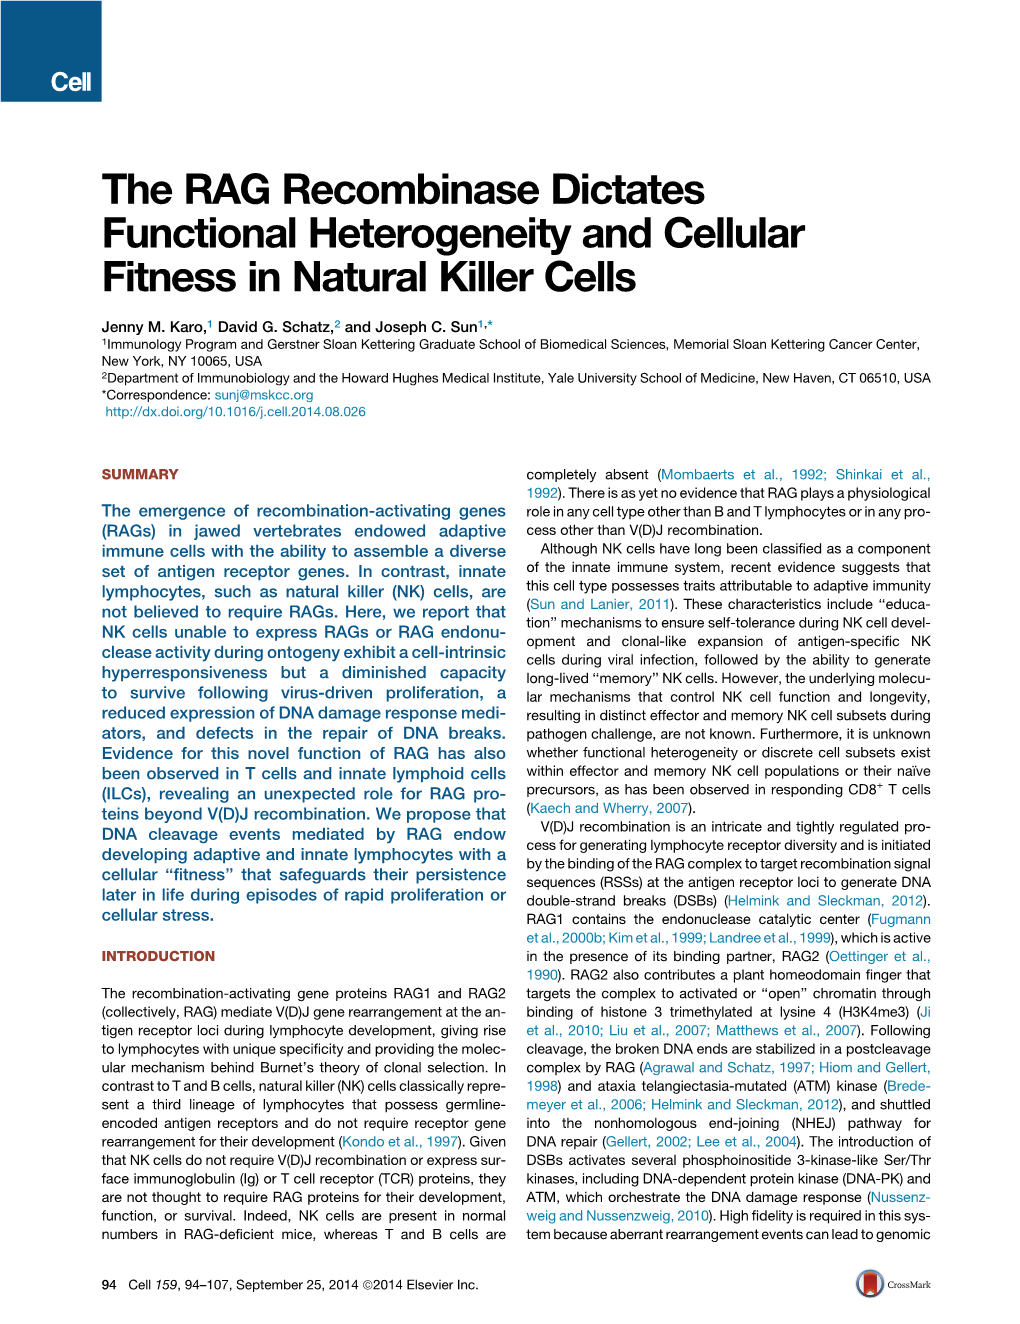 The RAG Recombinase Dictates Functional Heterogeneity and Cellular Fitness in Natural Killer Cells